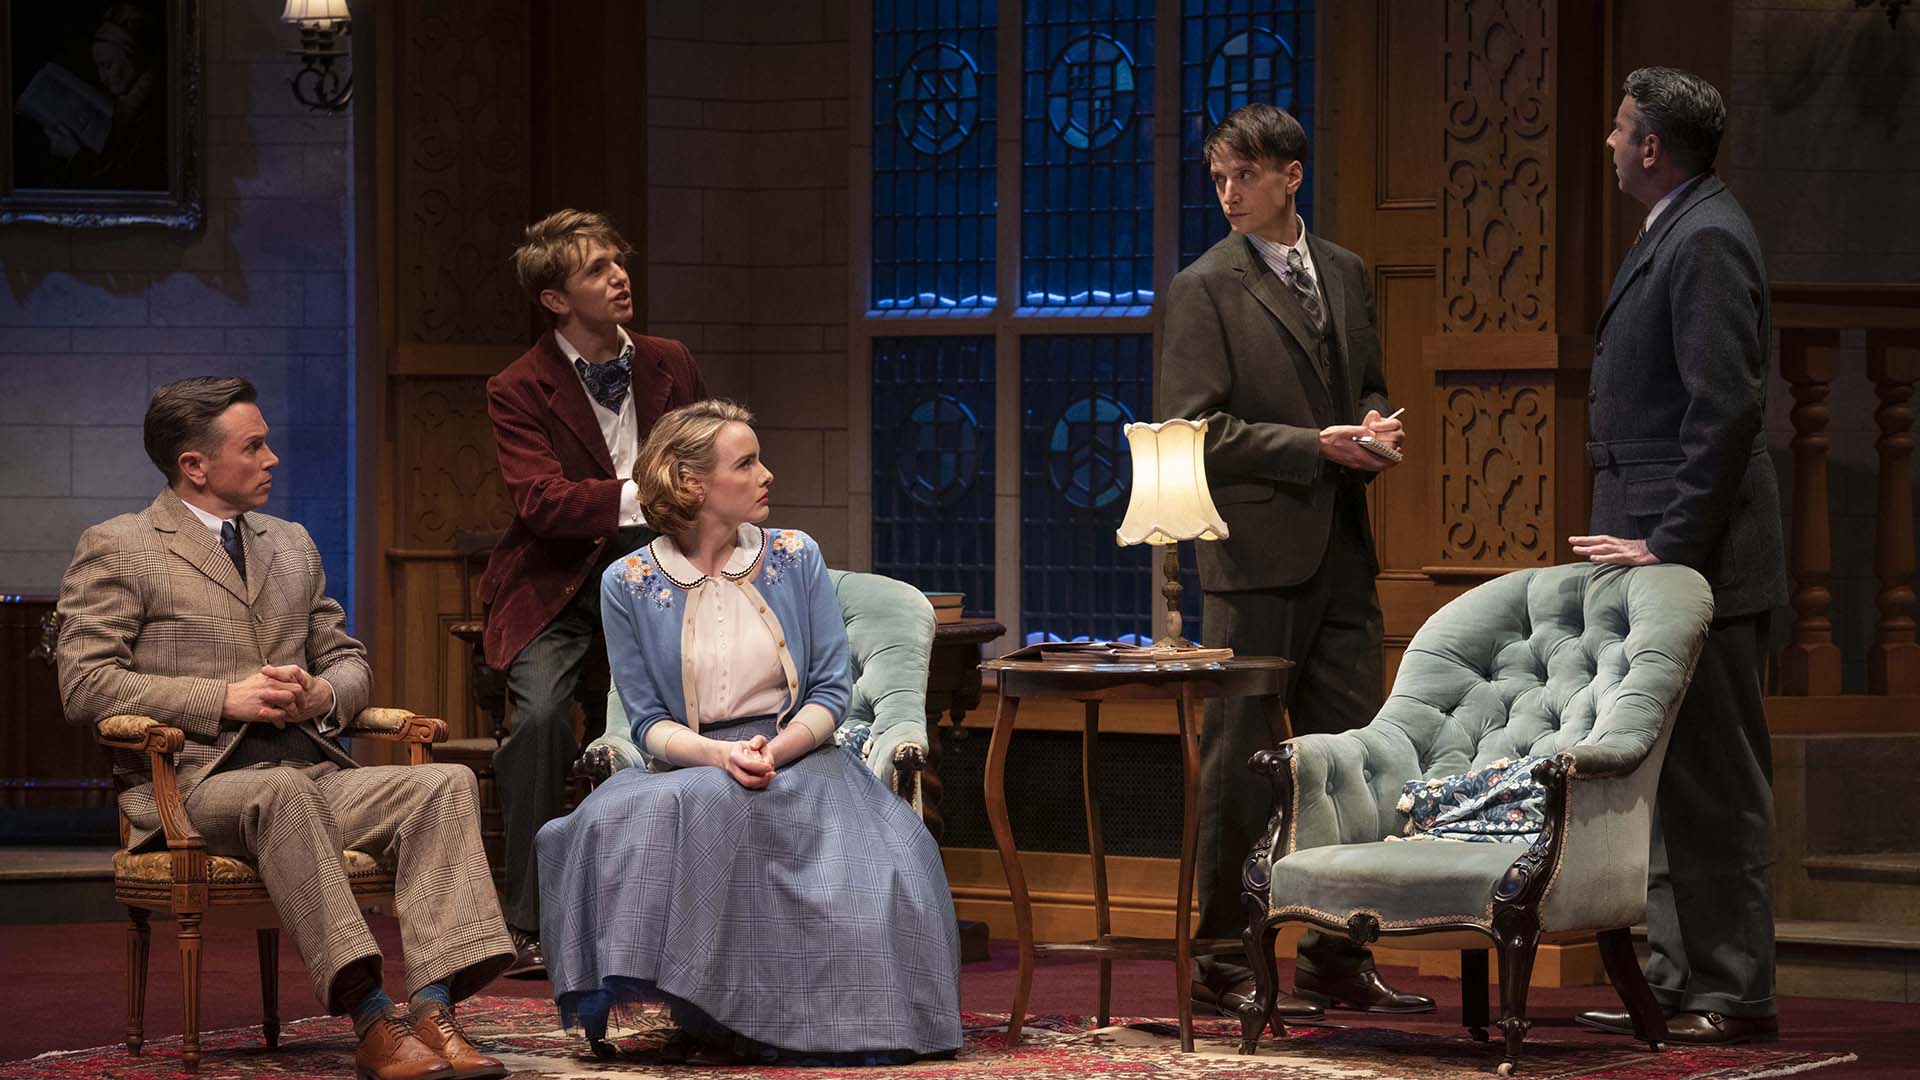 Famed Agatha Christie Whodunnit 'The Mousetrap' Is Returning to the Brisbane Stage This Autumn